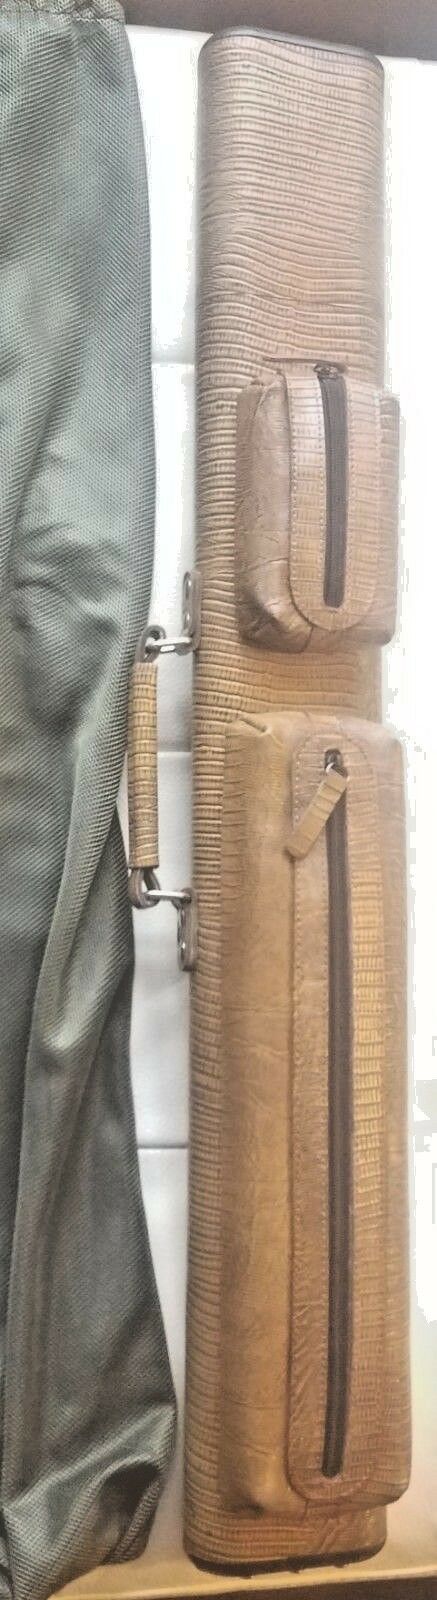 GTF 2x4 Brown Leather Gator Cue Case * BRAND NEW